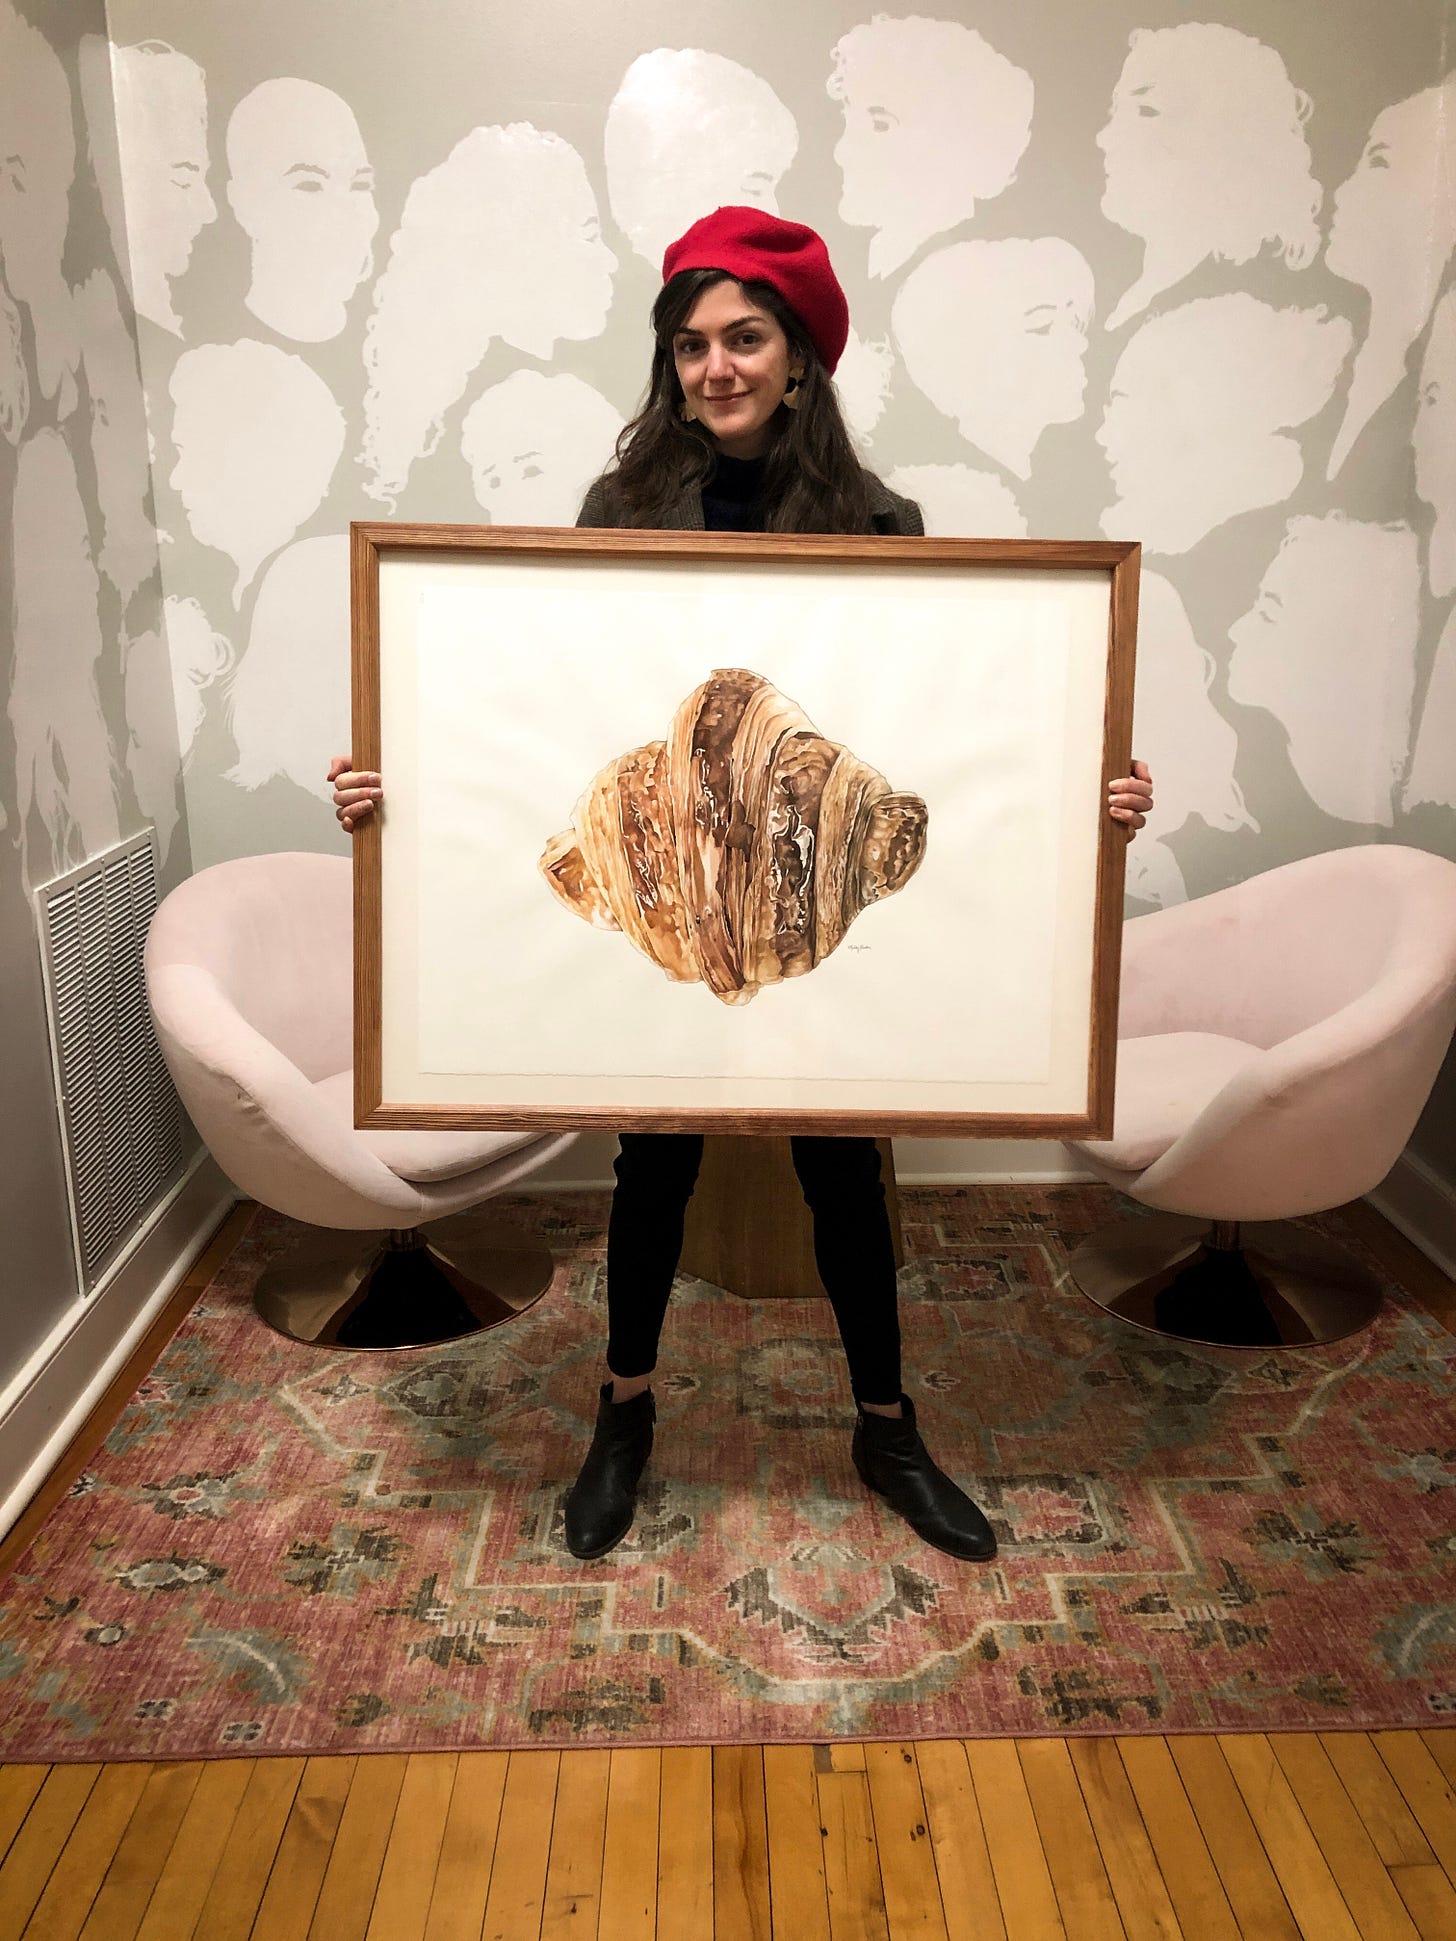 Photo of Molly standing holding the framed watercolor painting of the croissant in front of her